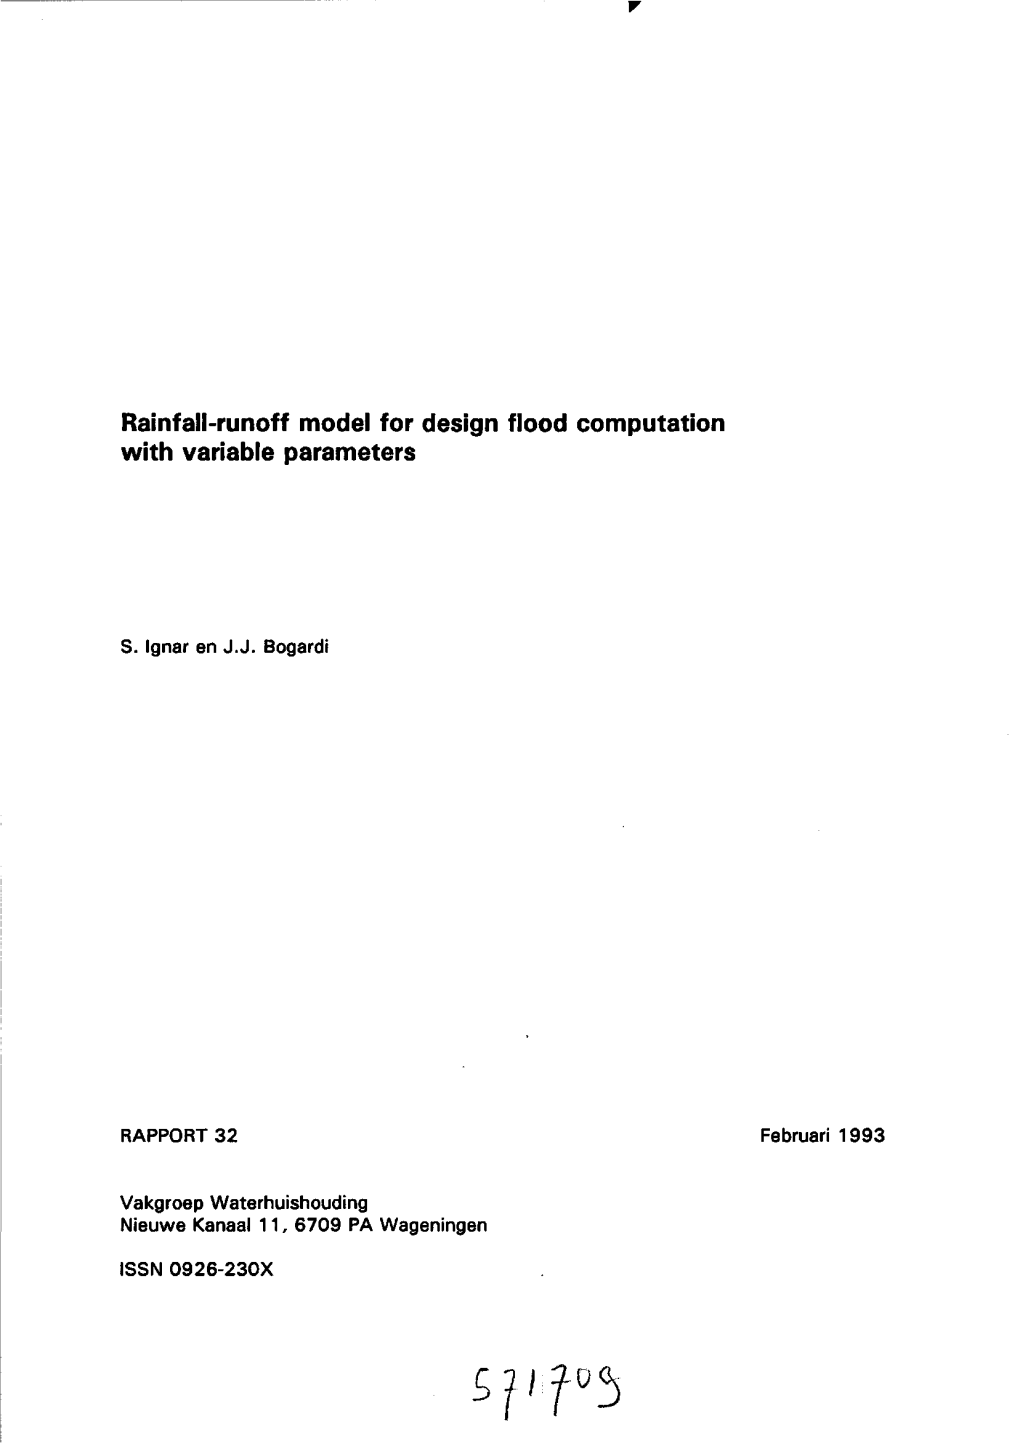 Rainfall-Runoff Model for Design Flood Computation with Variable Parameters